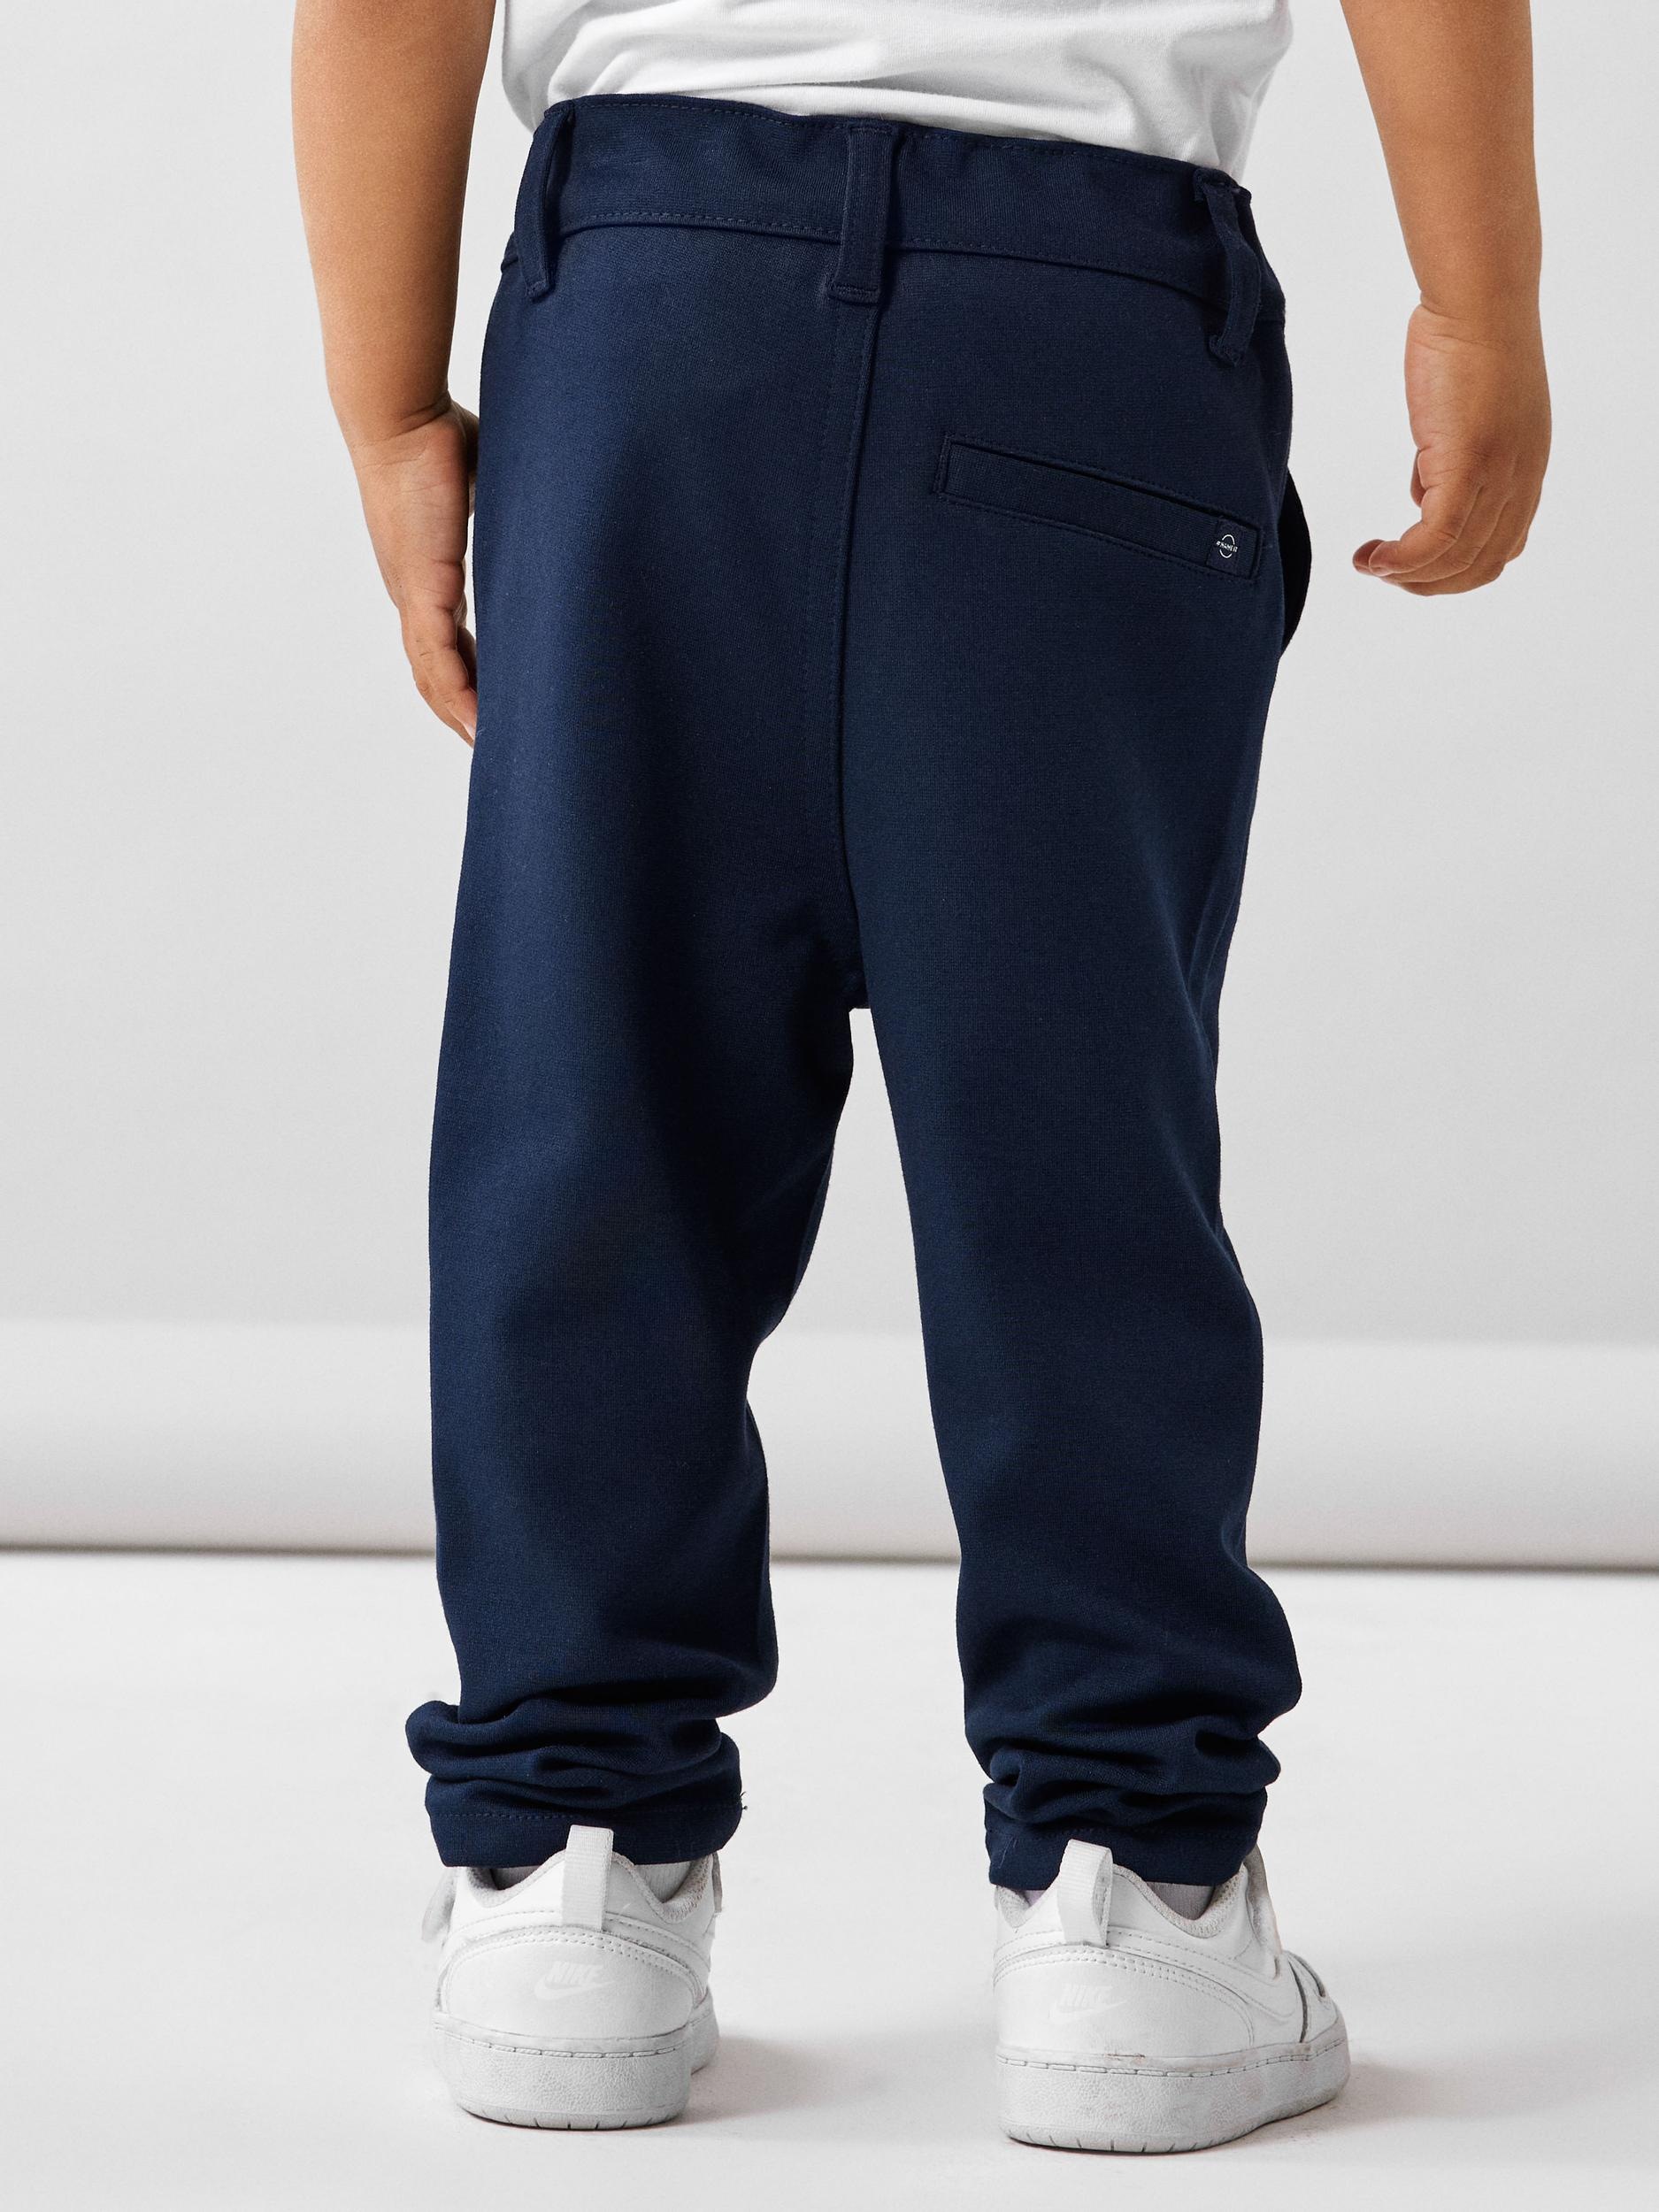 OTTO bestellen 1150-GS Chinohose bei PANT NOOS« It COMFORT »NMMSILAS Name